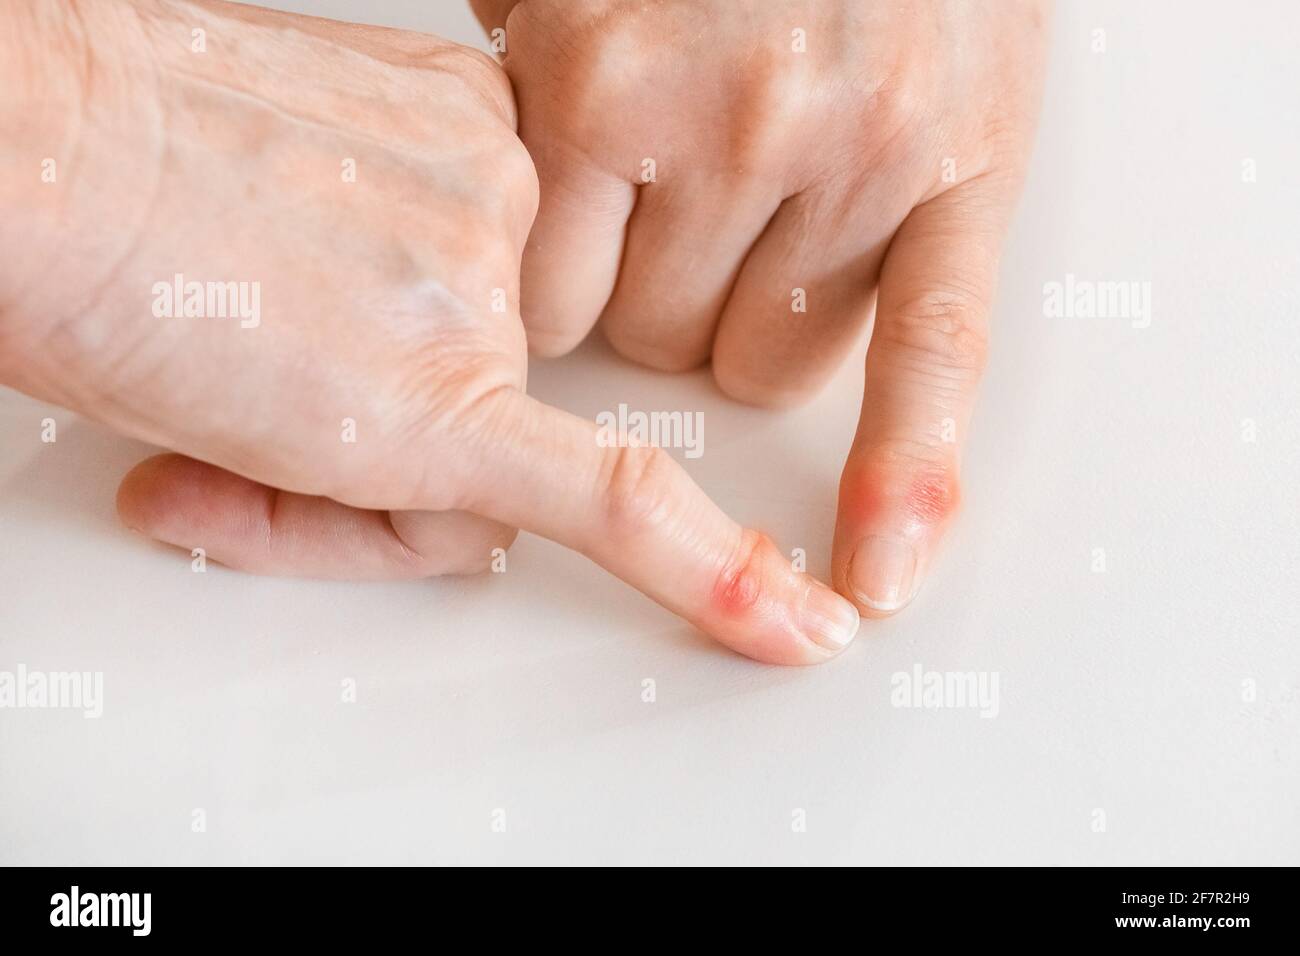 Two hands of an elderly woman indicate a disease of fingers and a change in joints close-up. Stock Photo